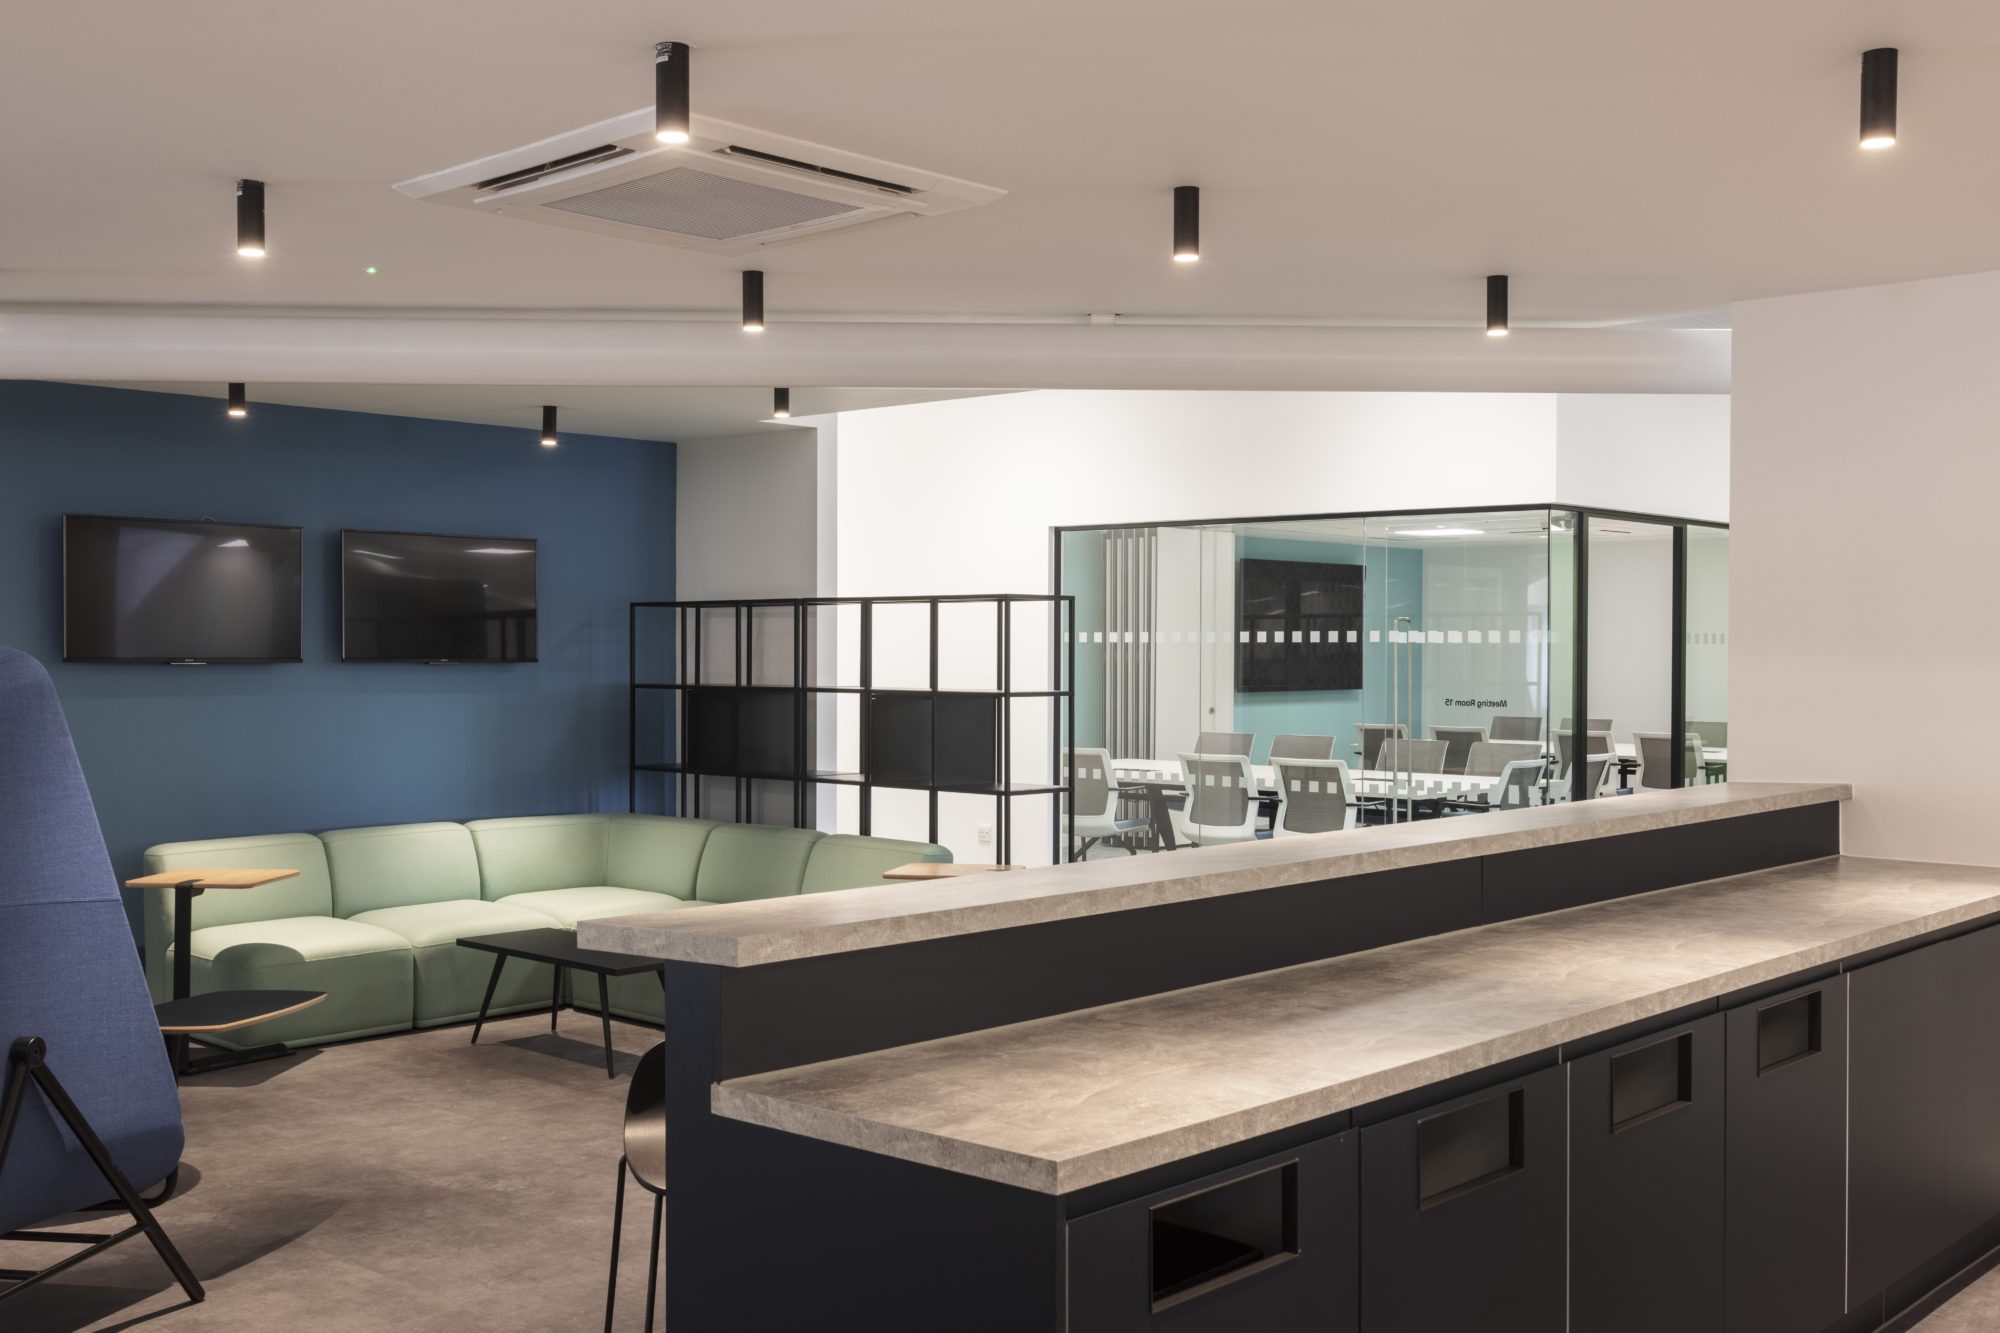 Office kitchen fit out with glazed meeting room